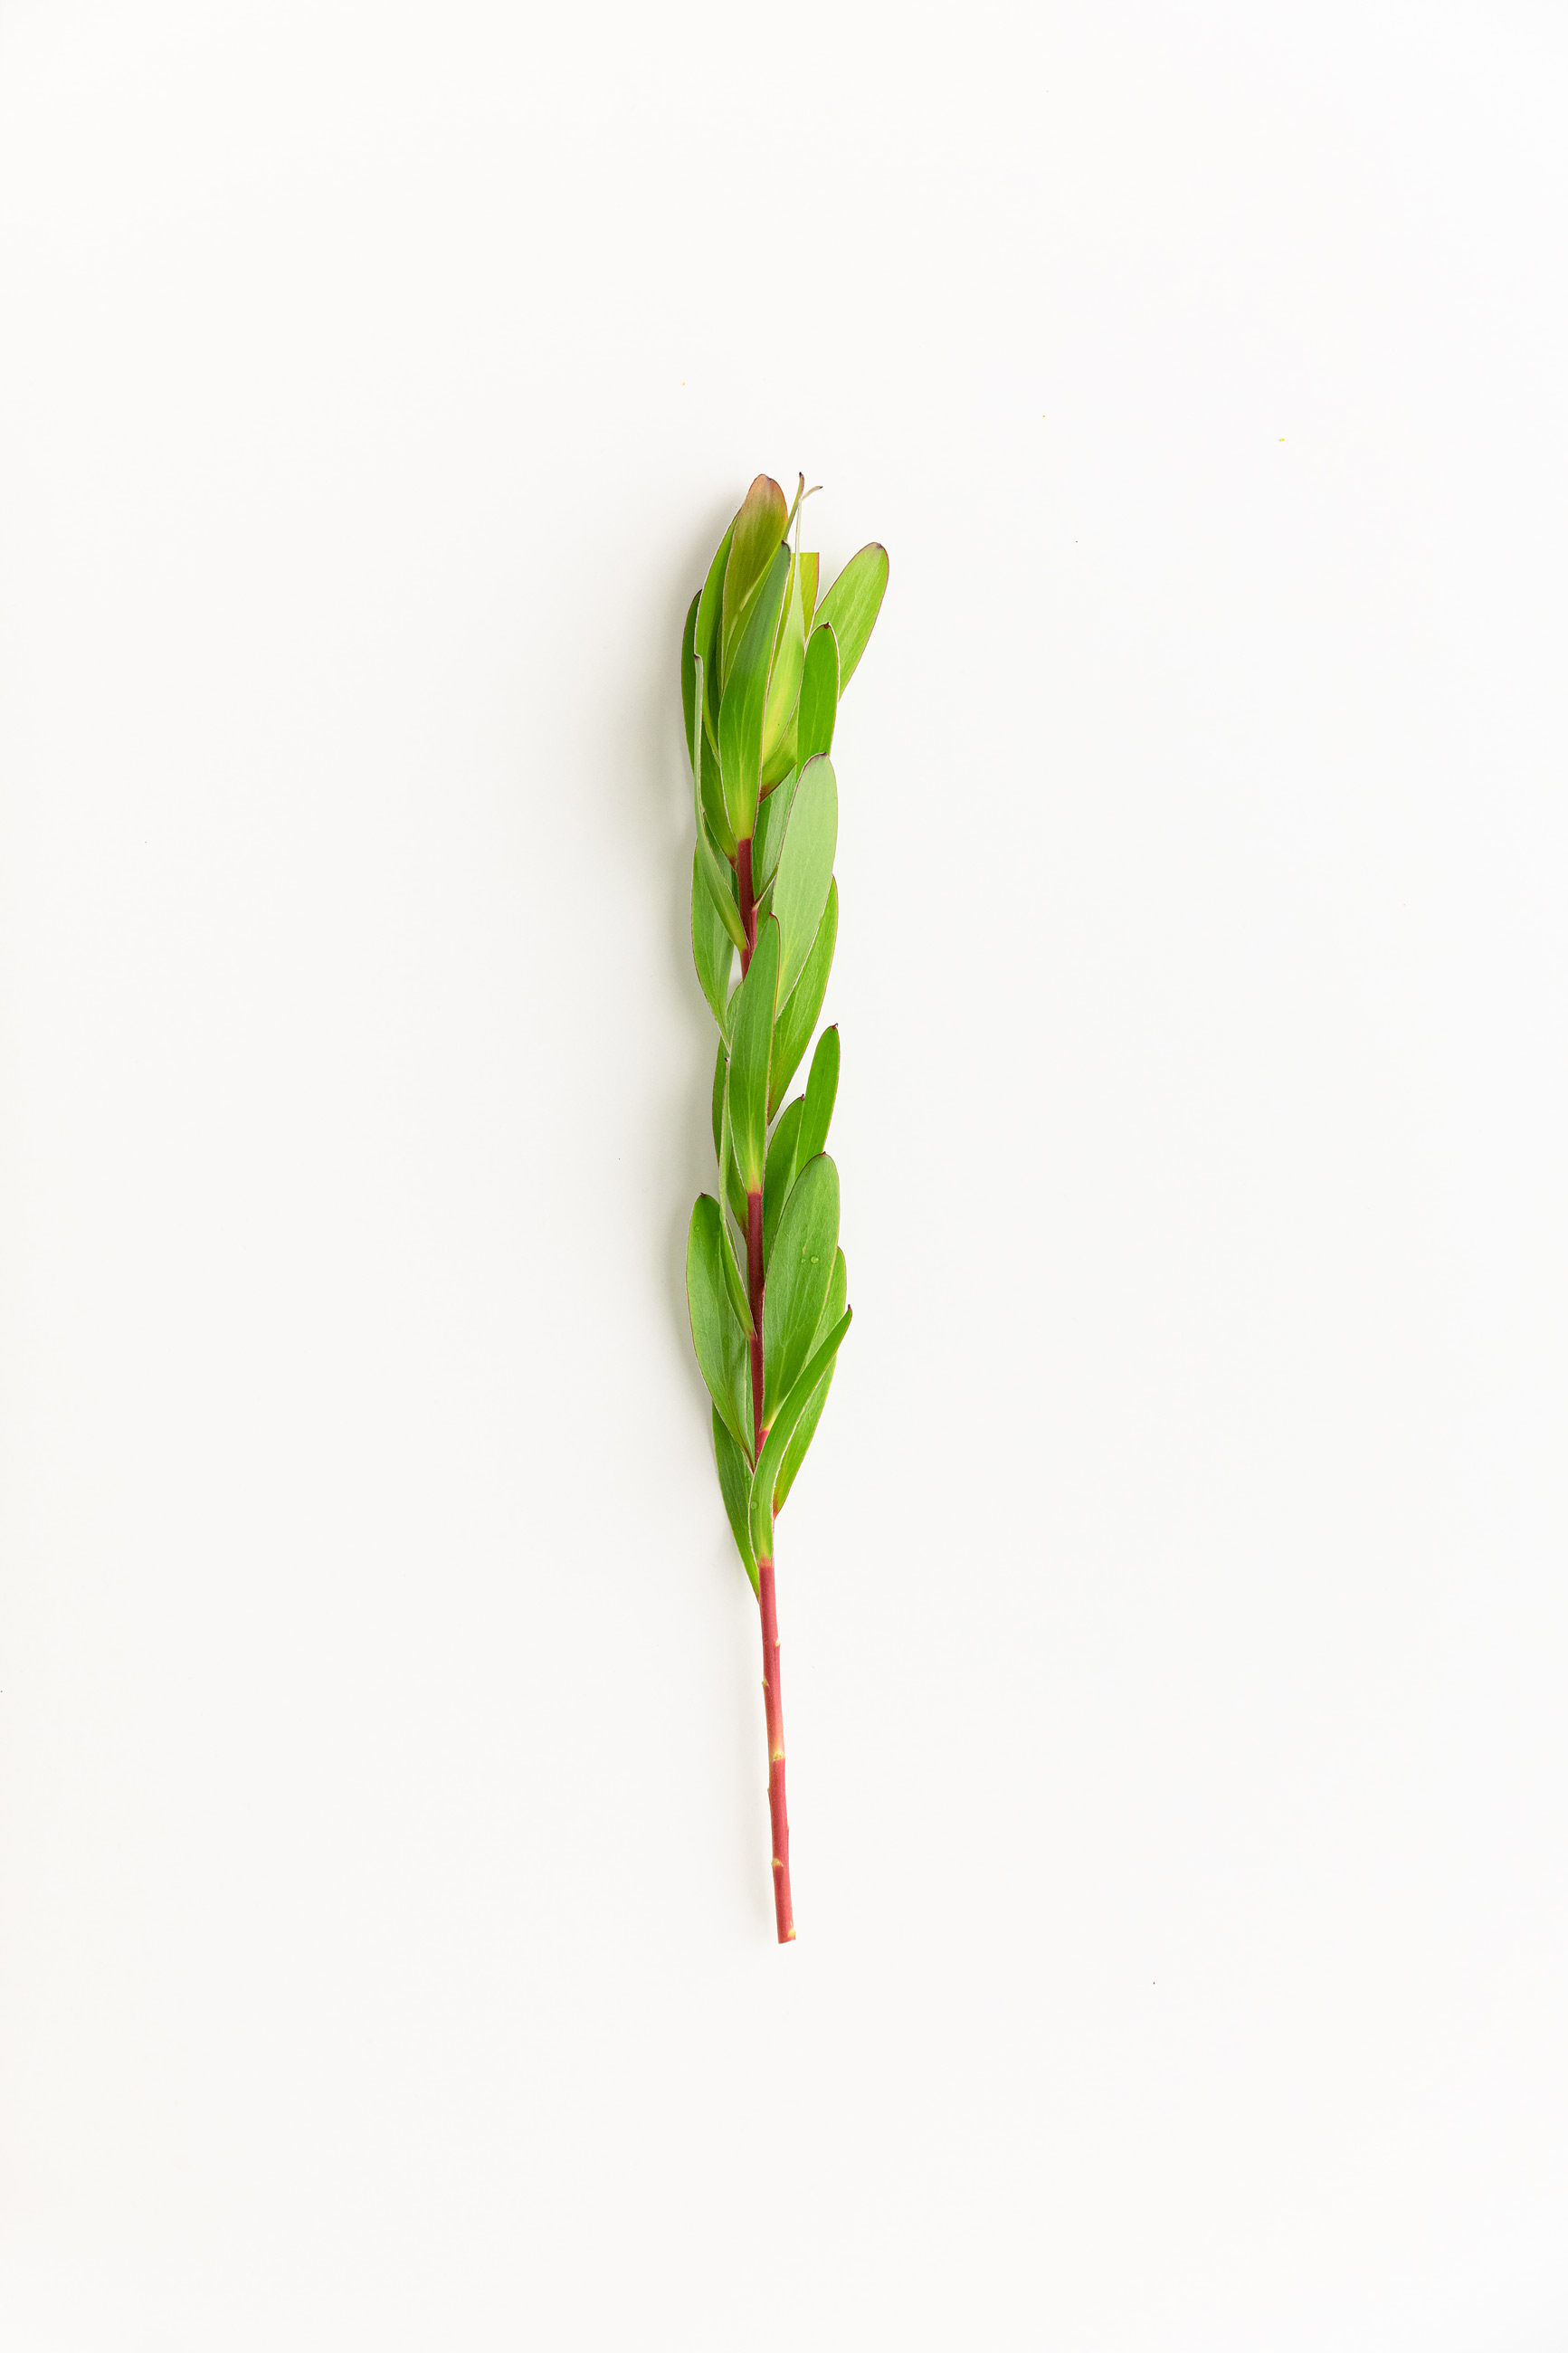 Twig of fresh tree with green leaves